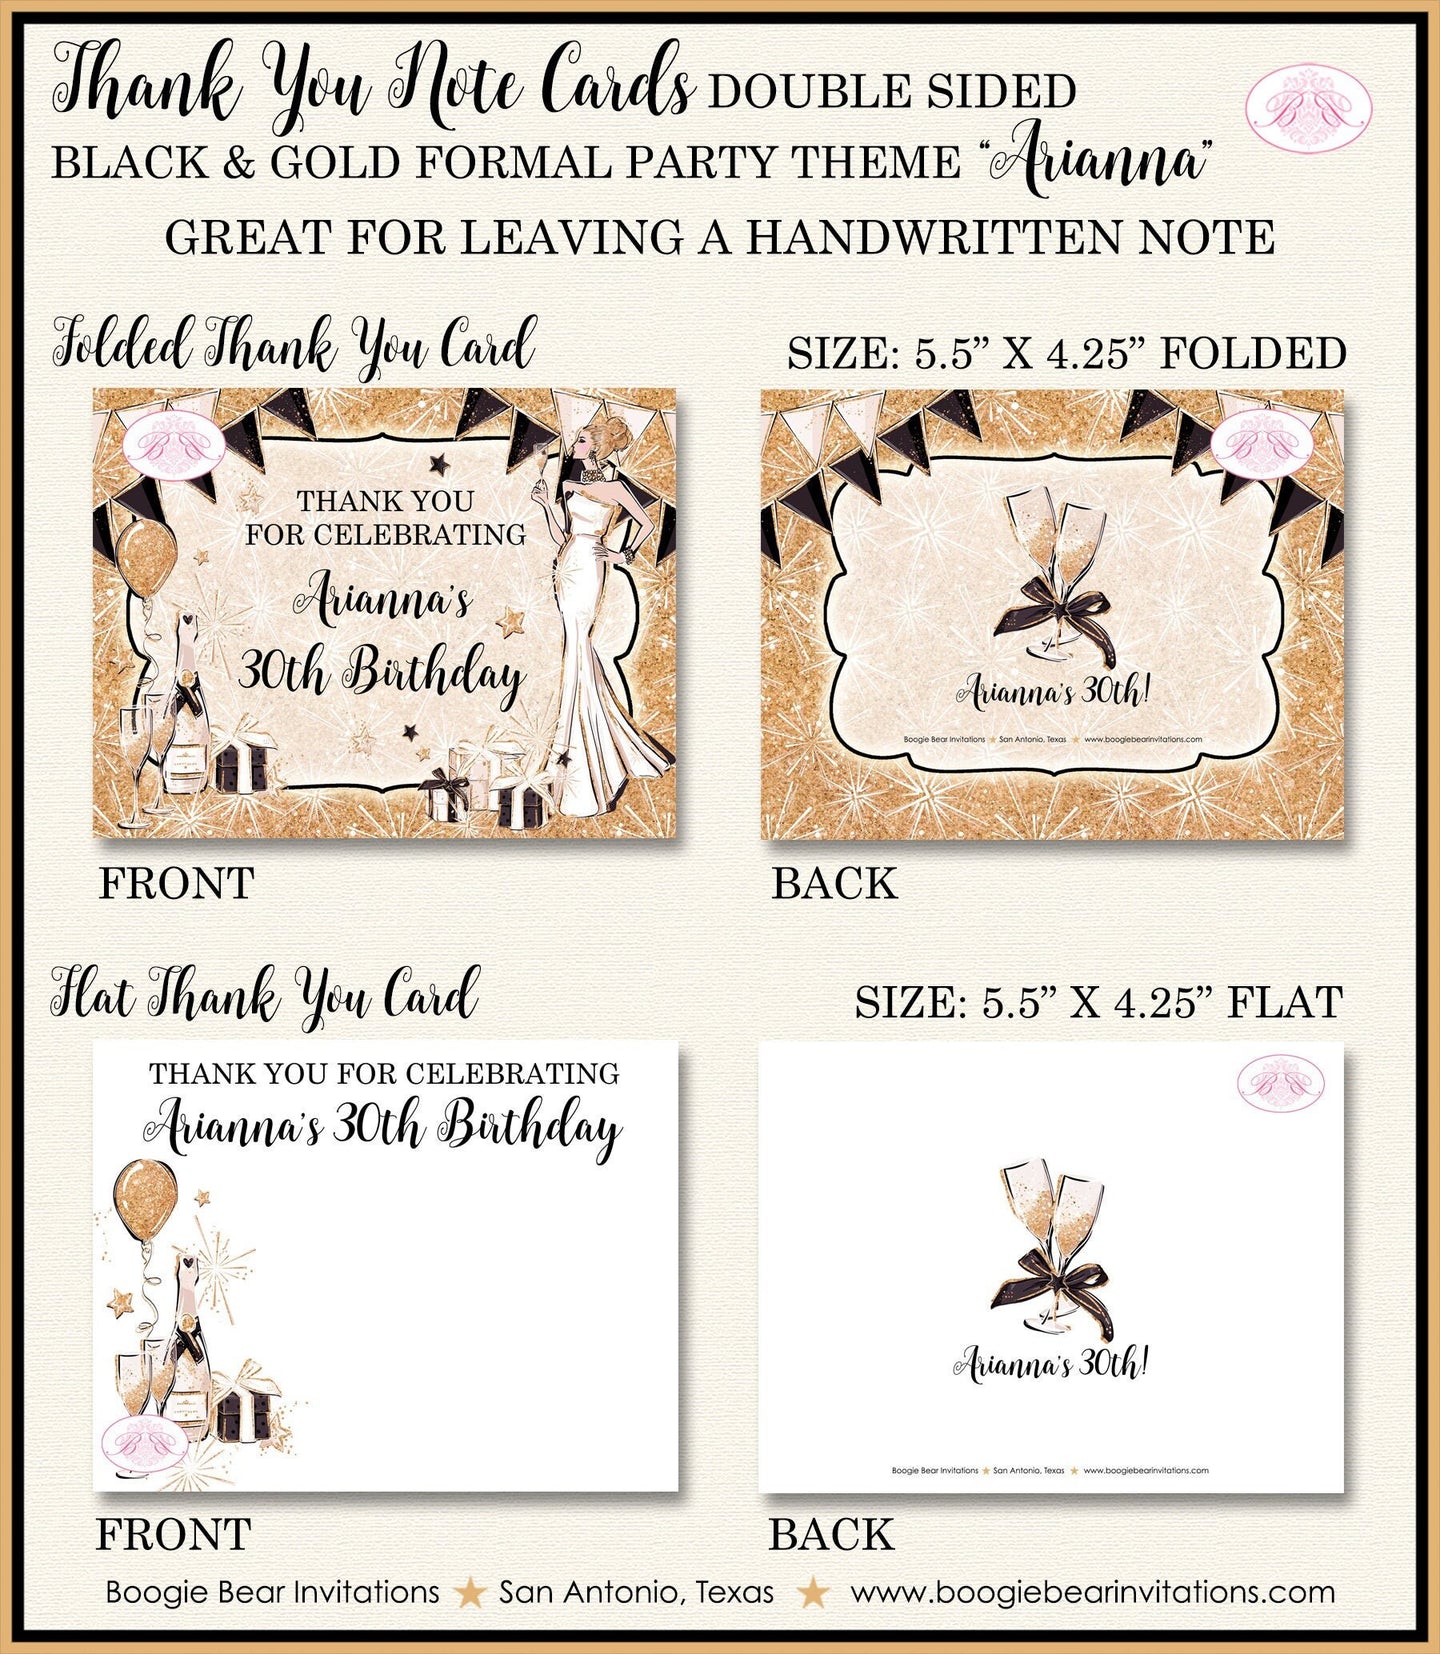 Black Gold Formal Party Thank You Card Birthday Note Fashion Chic New Years Eve Day Ball Girl Boogie Bear Invitations Arianna Theme Printed